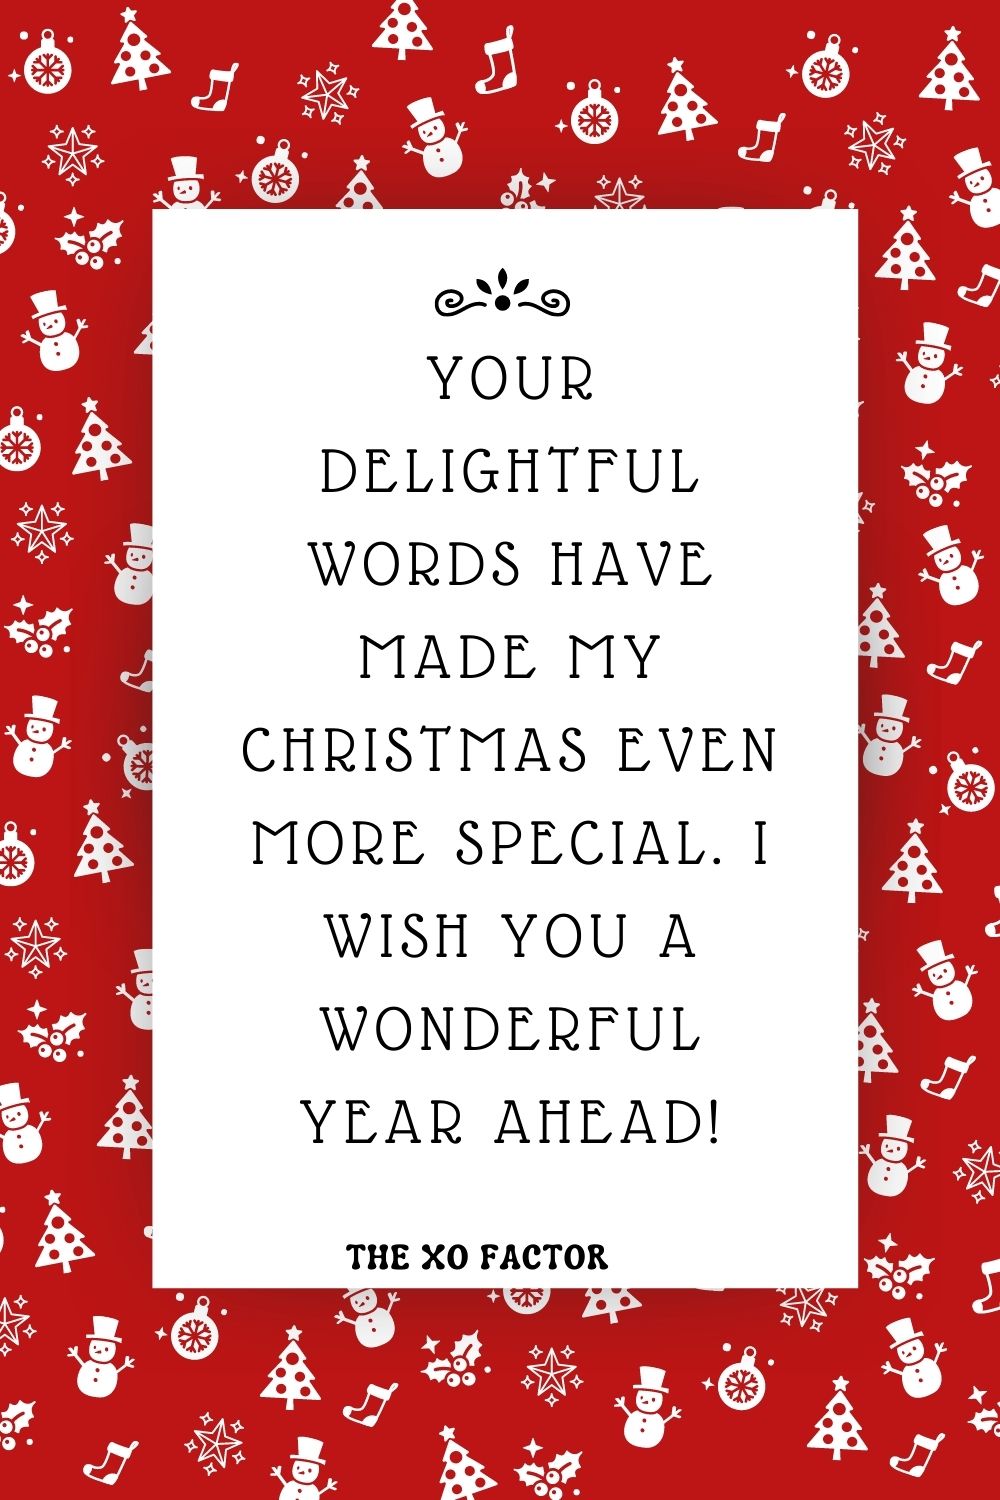 Your delightful words have made my Christmas even more special. I wish you a wonderful year ahead!